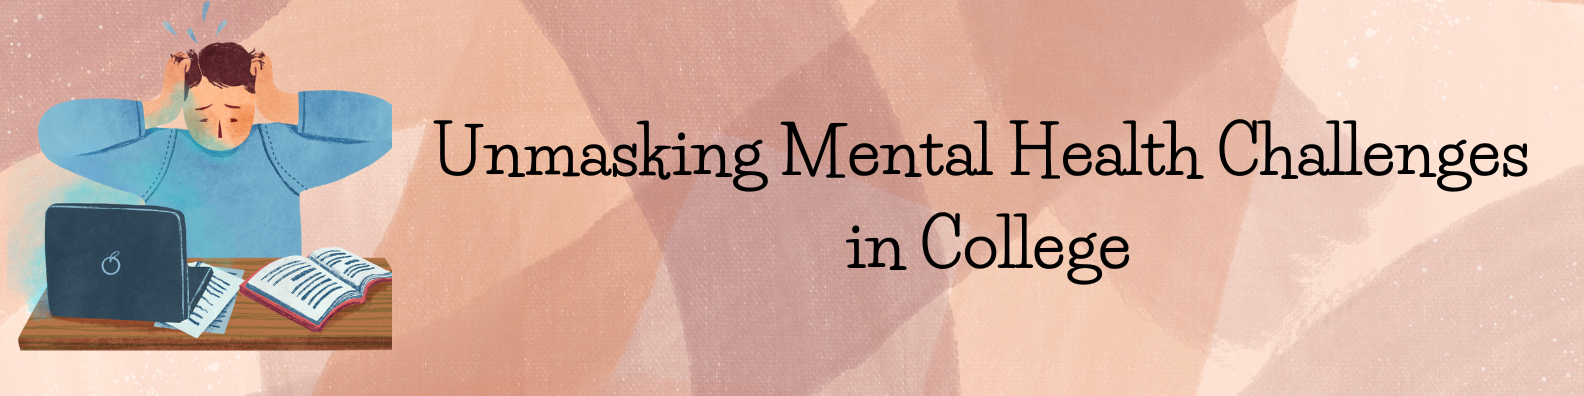 Unmasking Mental Health Challenges in College